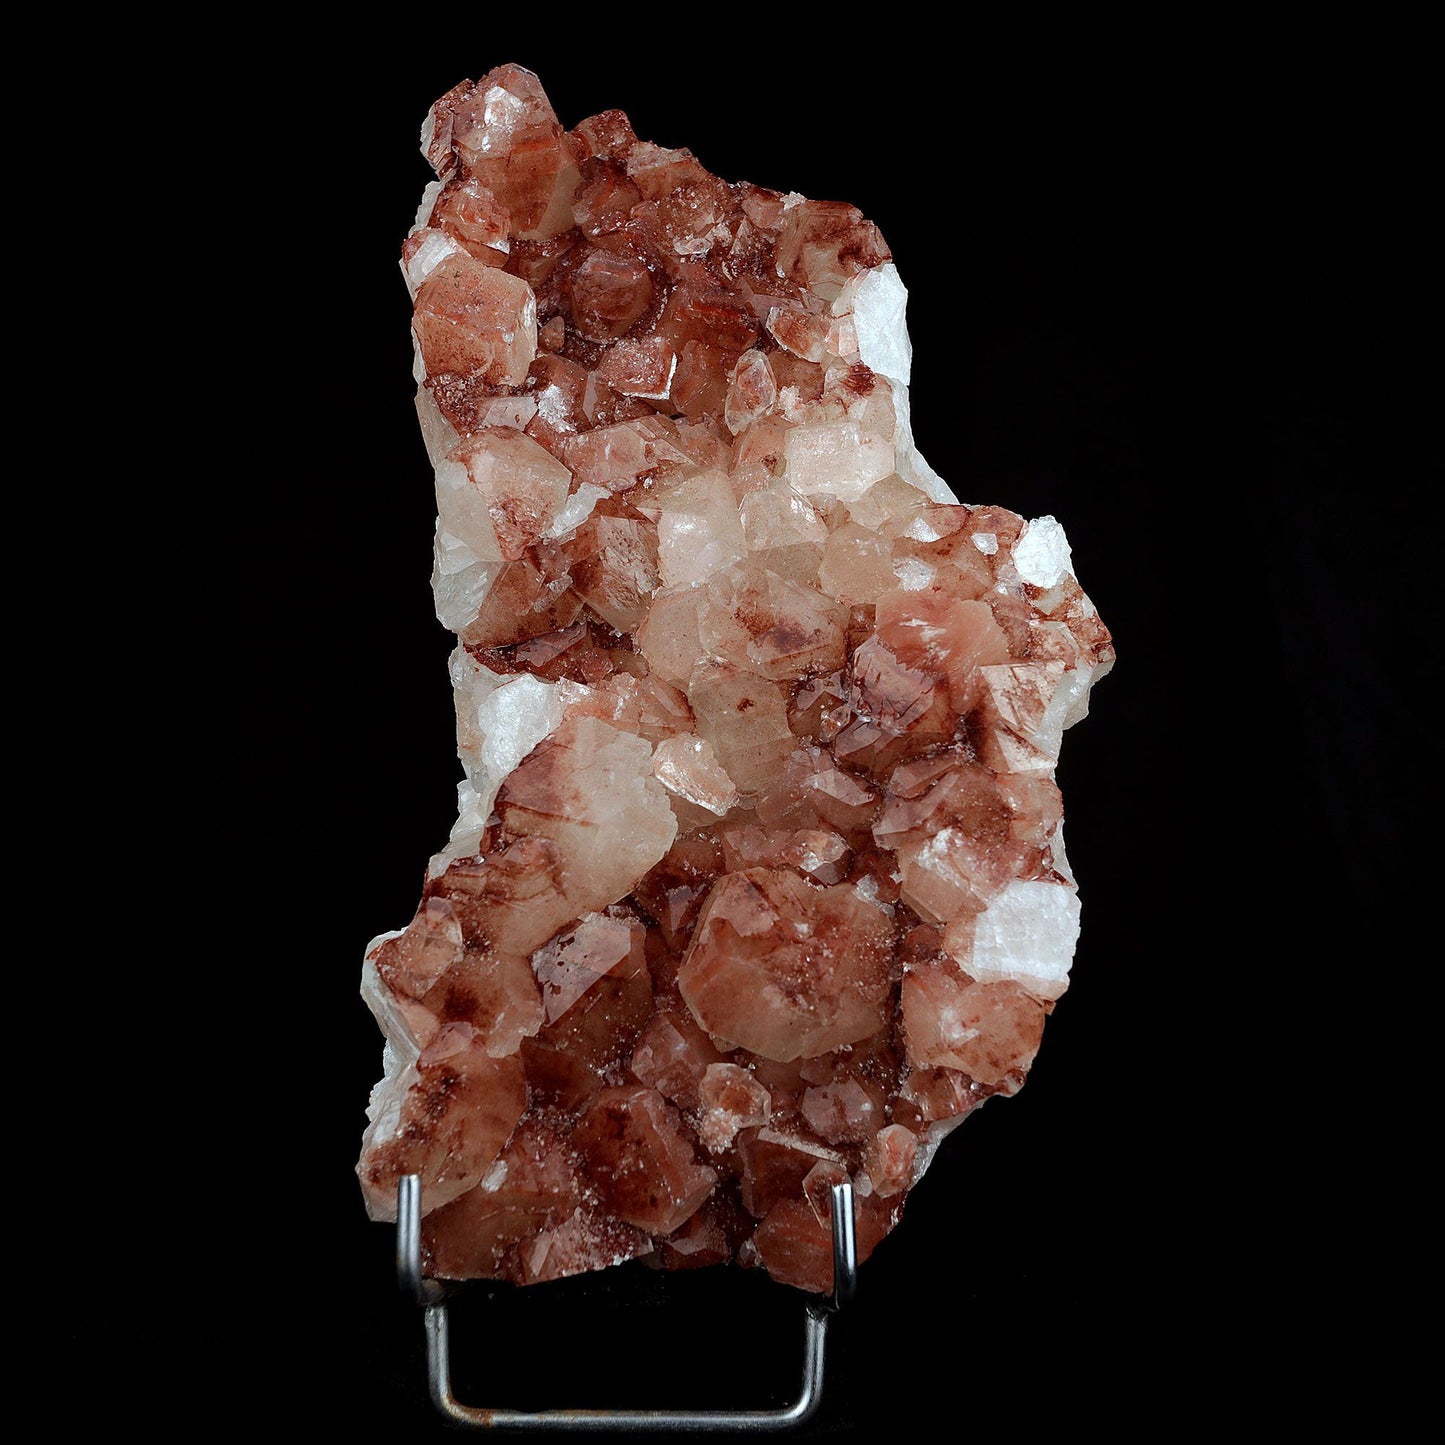 Apophyllite red cluster Natural Mineral Specimen # B 3715  https://www.superbminerals.us/products/apophyllite-red-cluster-natural-mineral-specimen-b-3715  Features:A lovely little Apophyllite Hematite Cluster makes it red apophyllite.&nbsp; This specimen is in top condition and makes for a very aesthetic and compact display piece.&nbsp; Several crystal shapes appear on the cluster and this is a more unusual form of the mineral, with the hematite inclusions in the Apophy